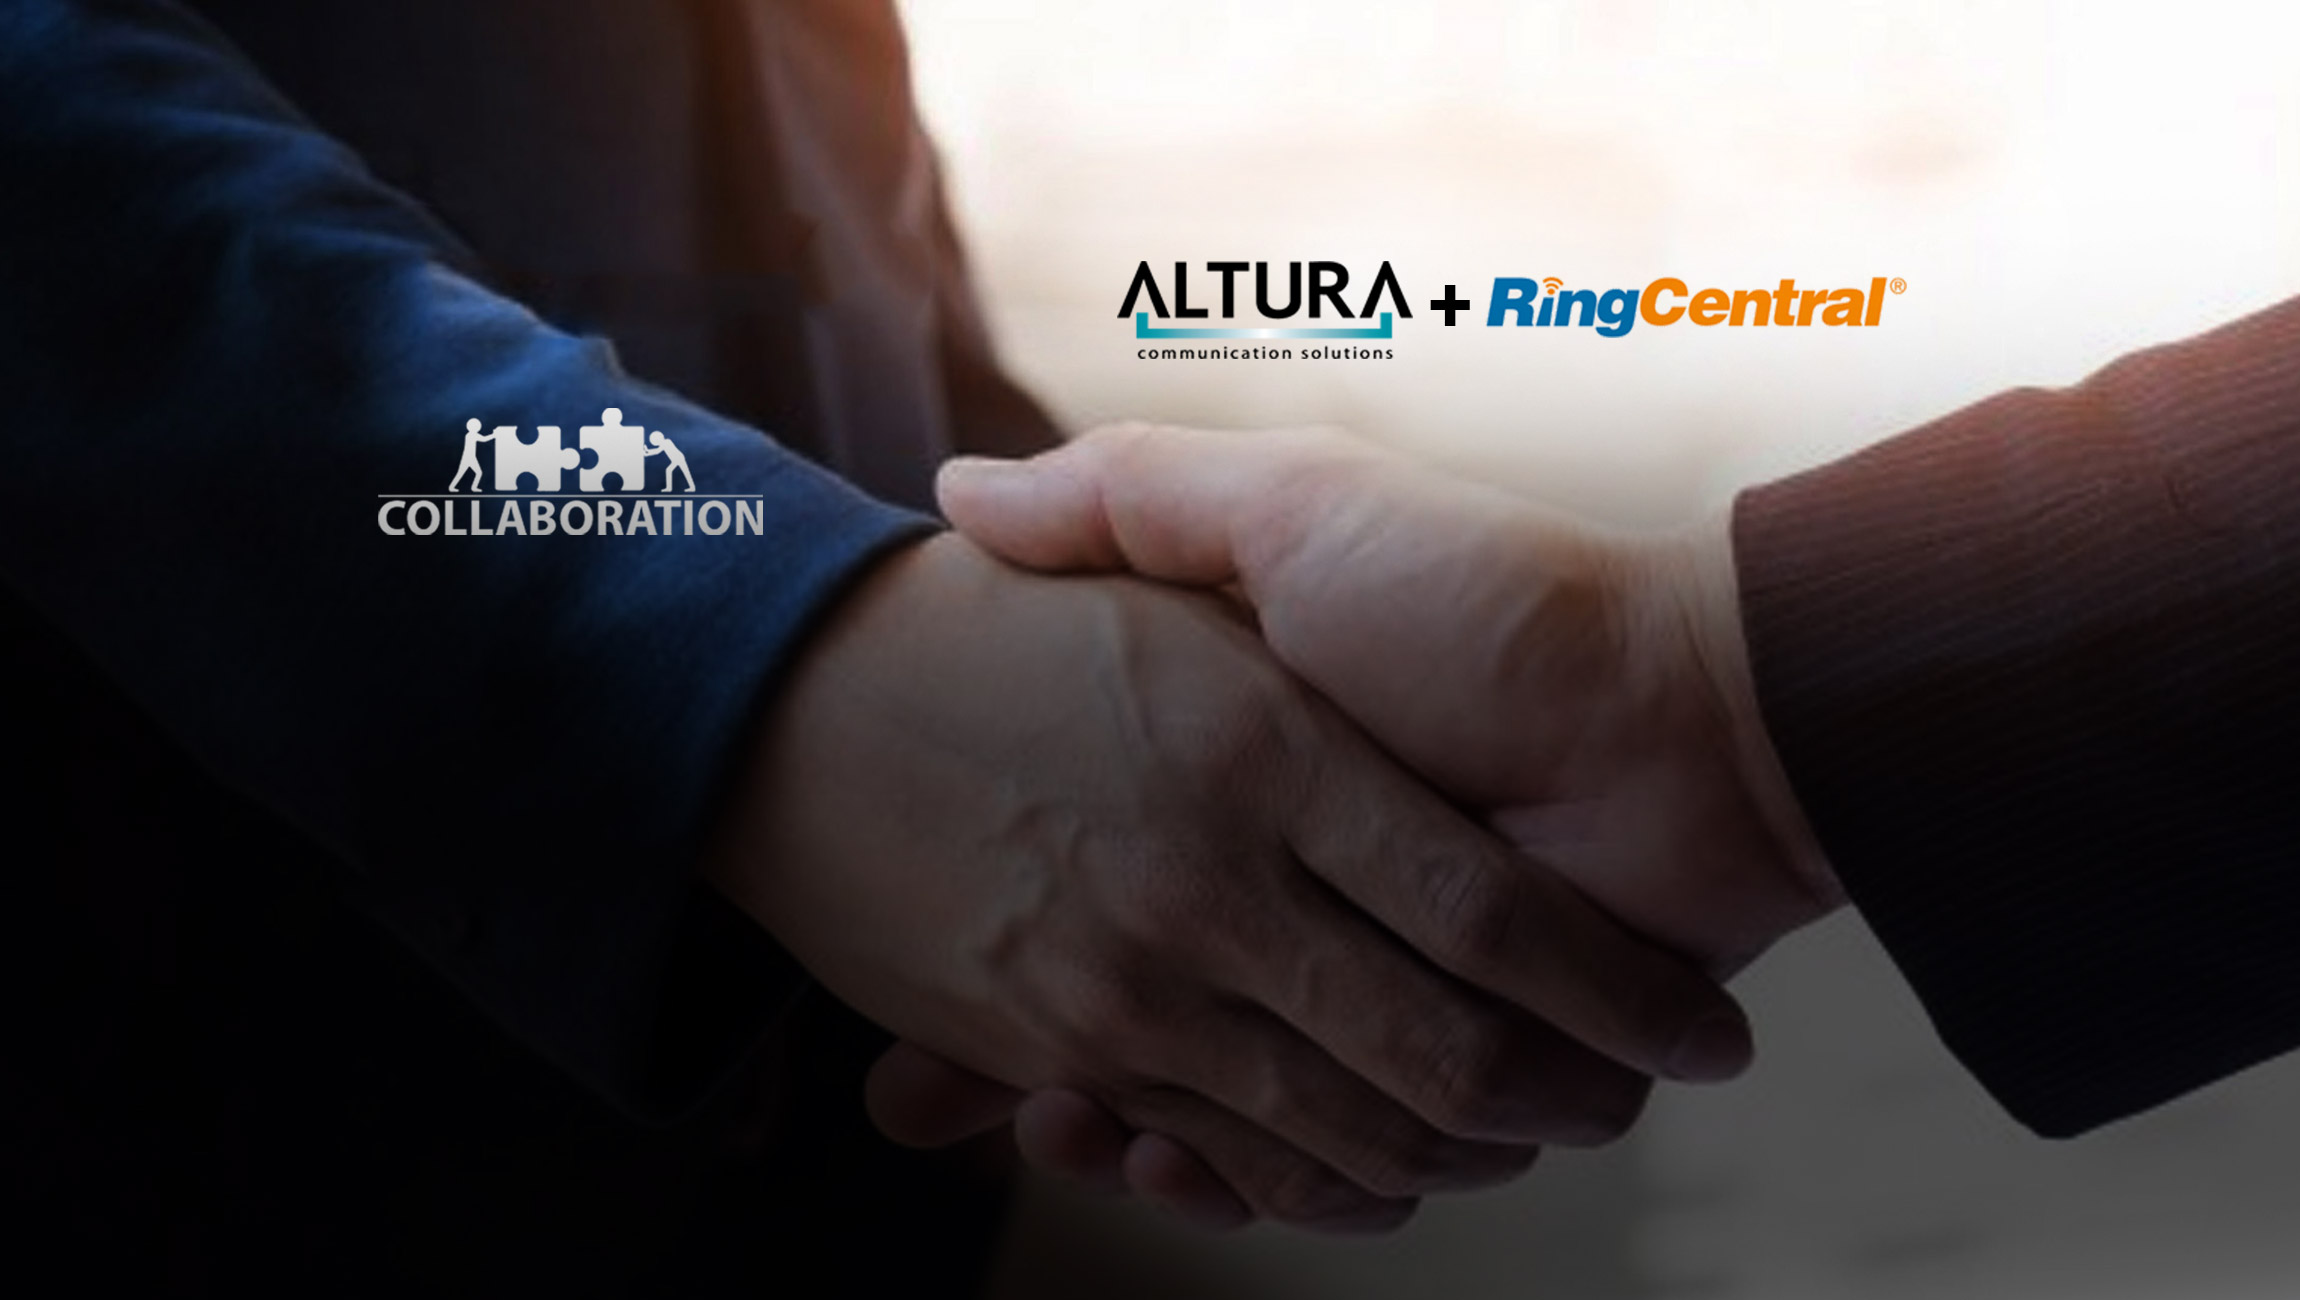 Altura Partners With RingCentral to Bring Industry-Leading Cloud Communications and Contact Center Solutions to US Enterprises